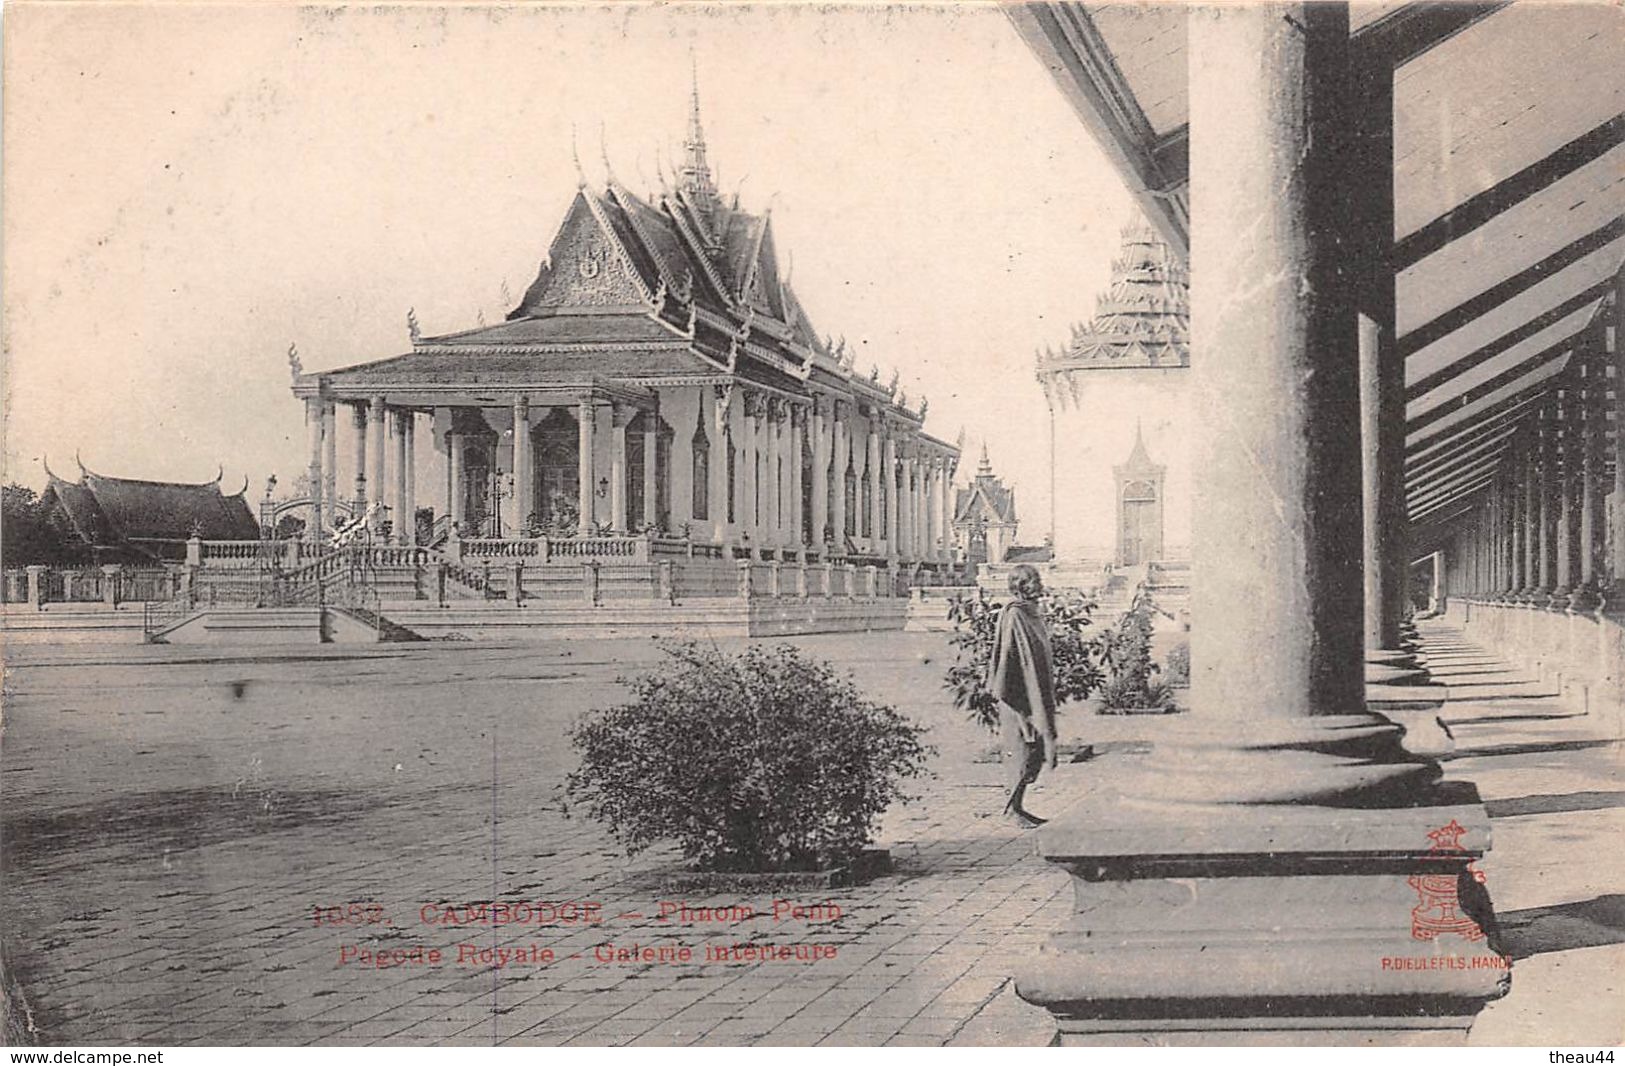 ¤¤  -  CAMBODGE   -  PHNOM-PENH  -  Pagode Royale  -  Galerie Intérieure     -  ¤¤ - Cambodge